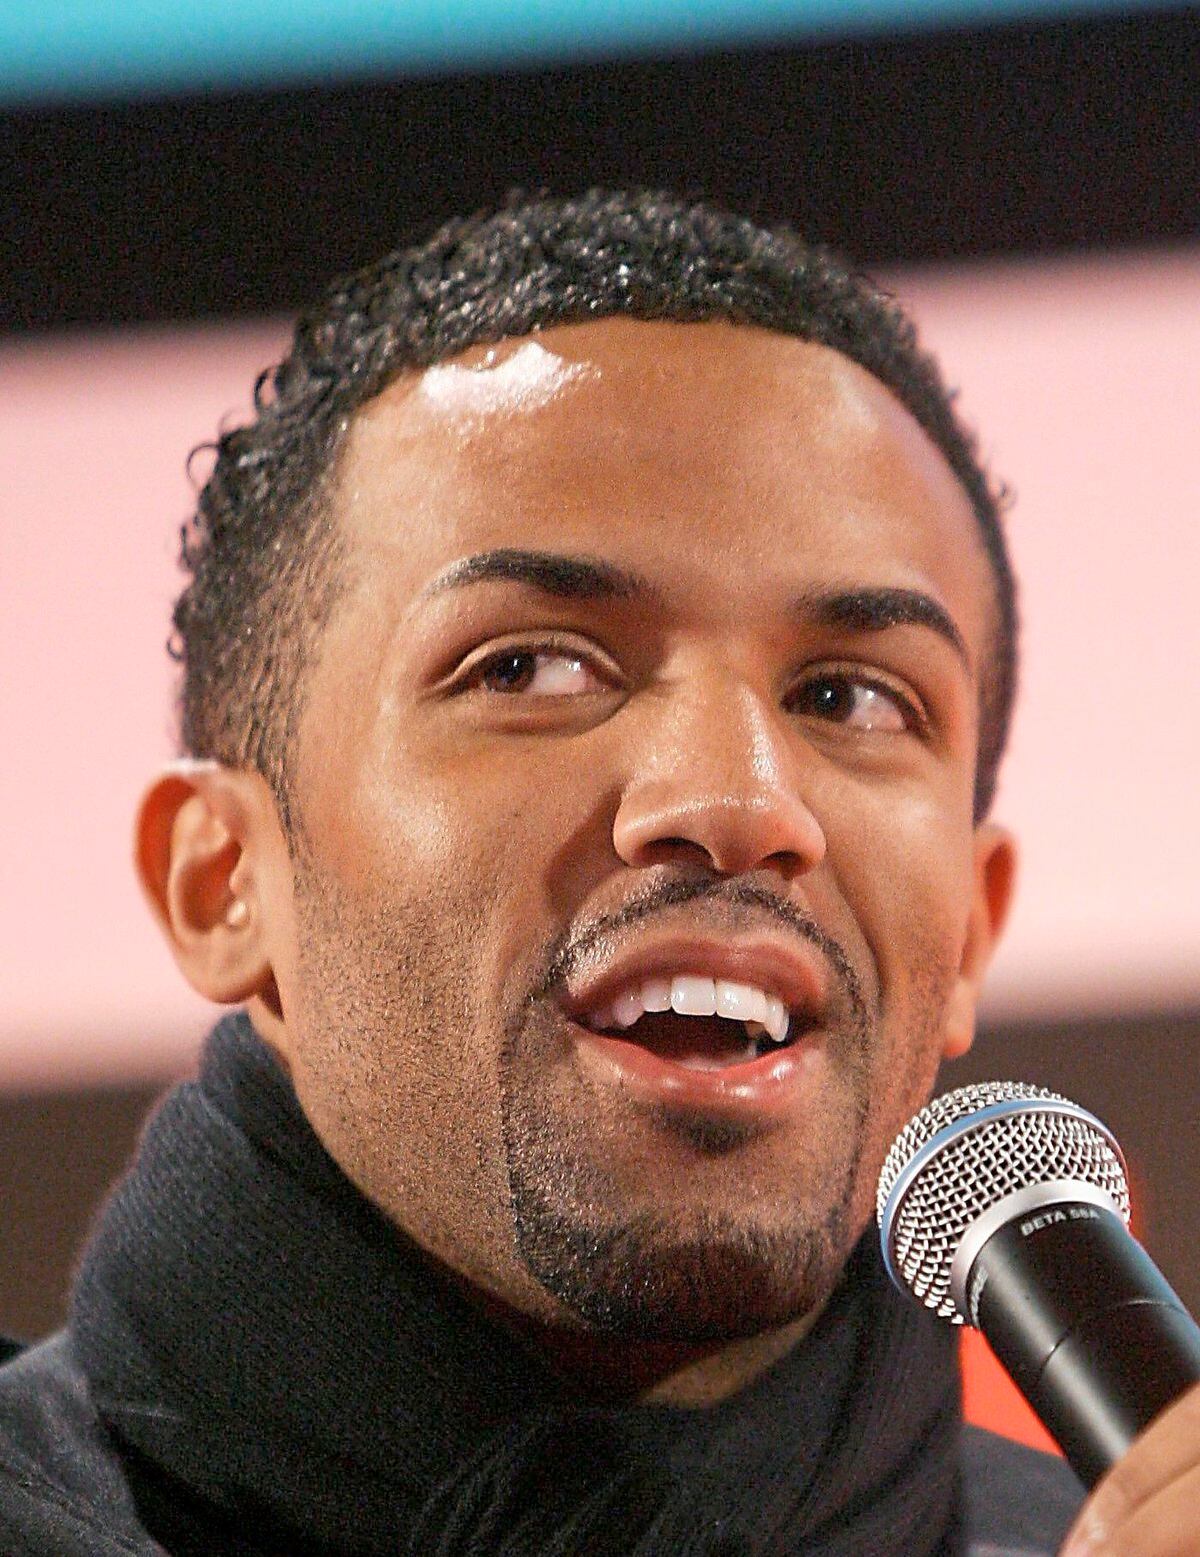 British singer Craig David speaks during a conference at the 3GSM World Congress in Barcelona, Spain February 15, 2006. The world's top handset makers have launched new models at the 3GSM wireless trade show in Barcelona this week, ranging from leading-edge niche products by BenQ Siemens to potential volume sellers from market leader Nokia. The event runs until Thursday. REUTERS/Albert Gea